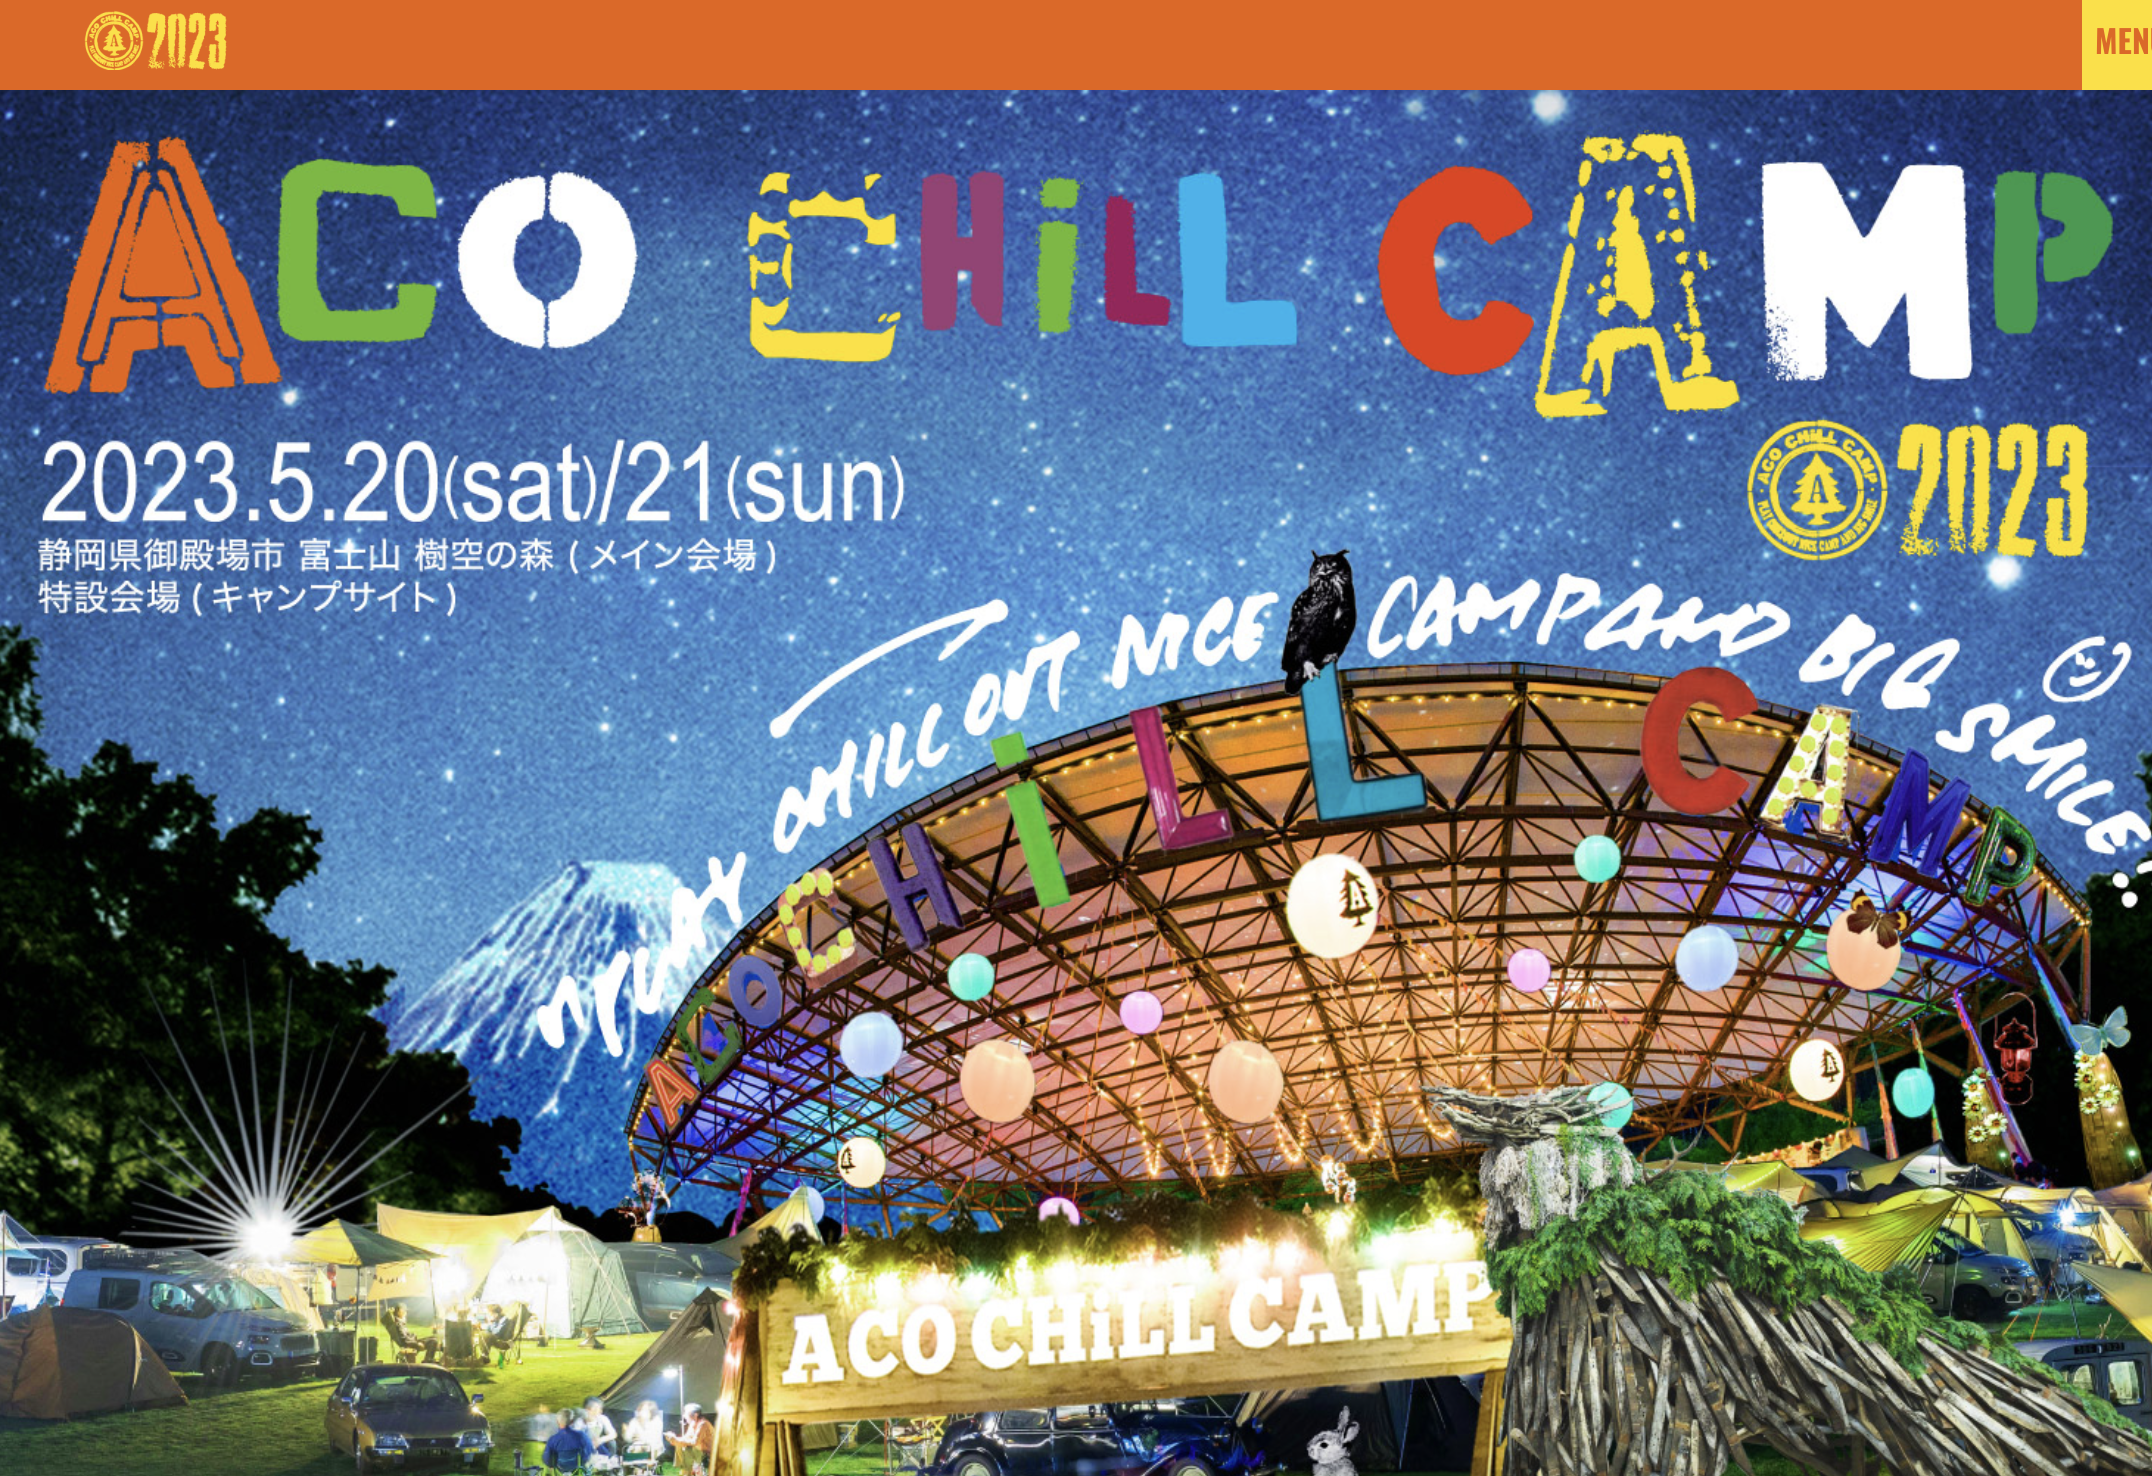 ACO CHiLL CAMP2023 / ORGANISE